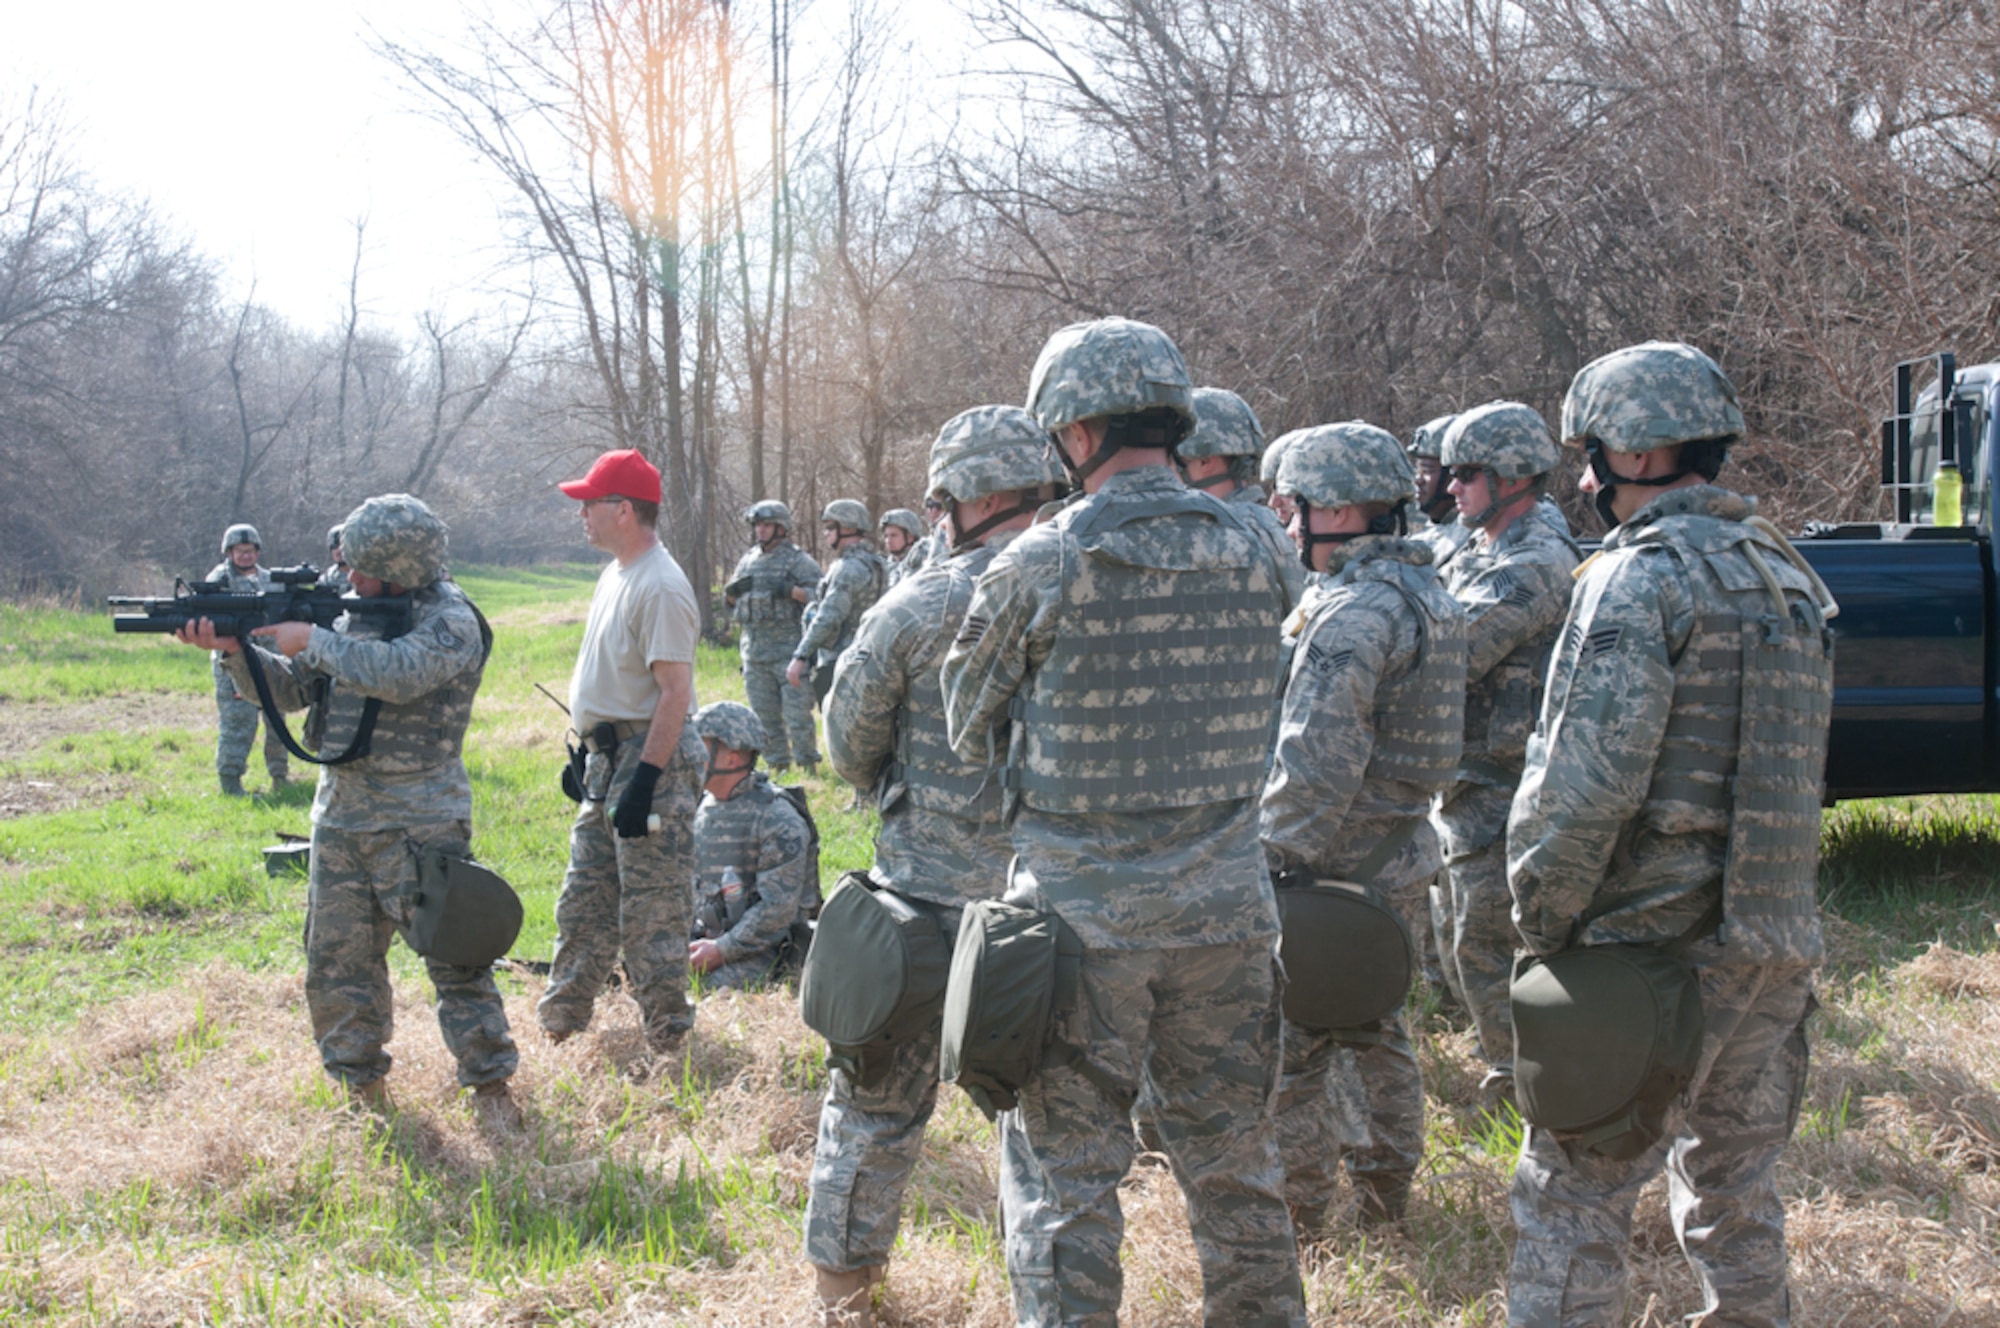 Members of the 139th Security Forces Squadron train for an upcoming deployment to Iraq, Sunday, April 3, 2011, on Rosecrans Memorial Airport, St. Joseph, Mo. (U.S. Air Force photo by Airman 1st Class Kelsey Stuart)
